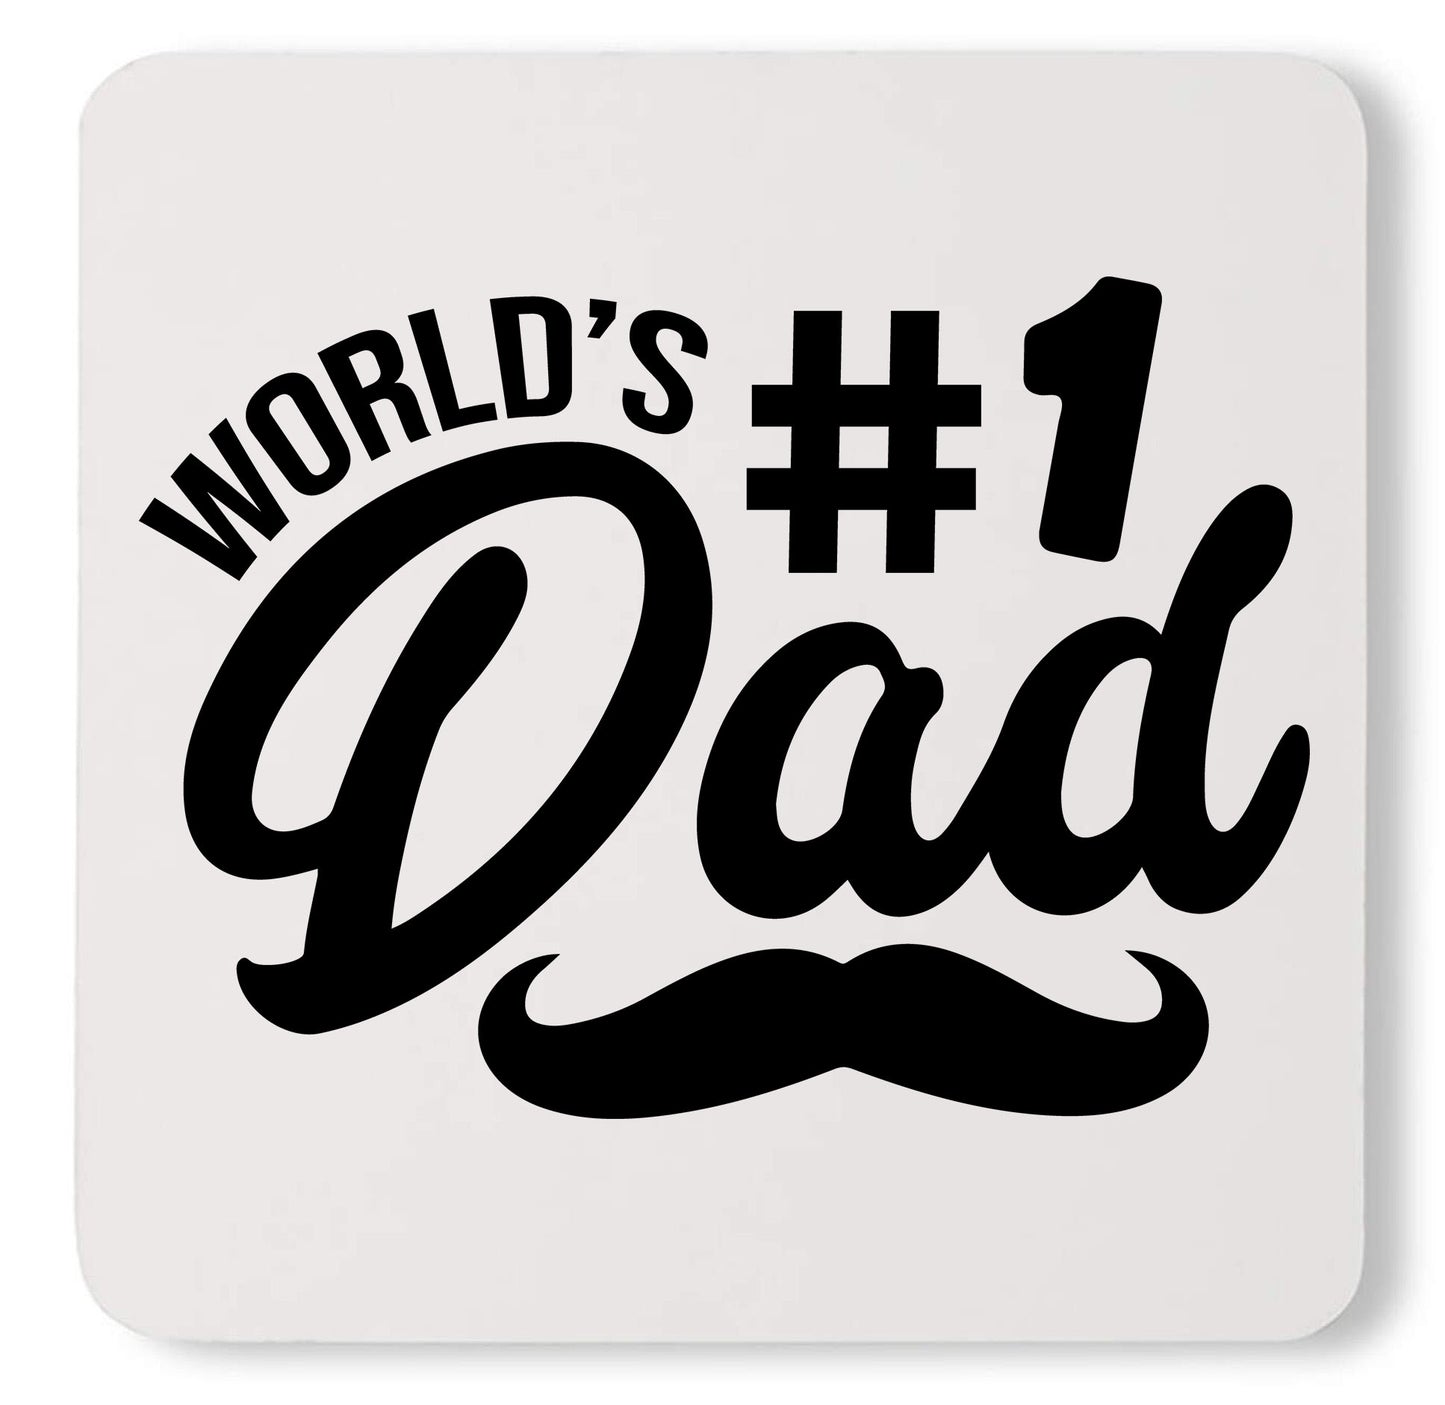 World's Number One Dad Lover Comfort Color Custom Father's Day Coaster